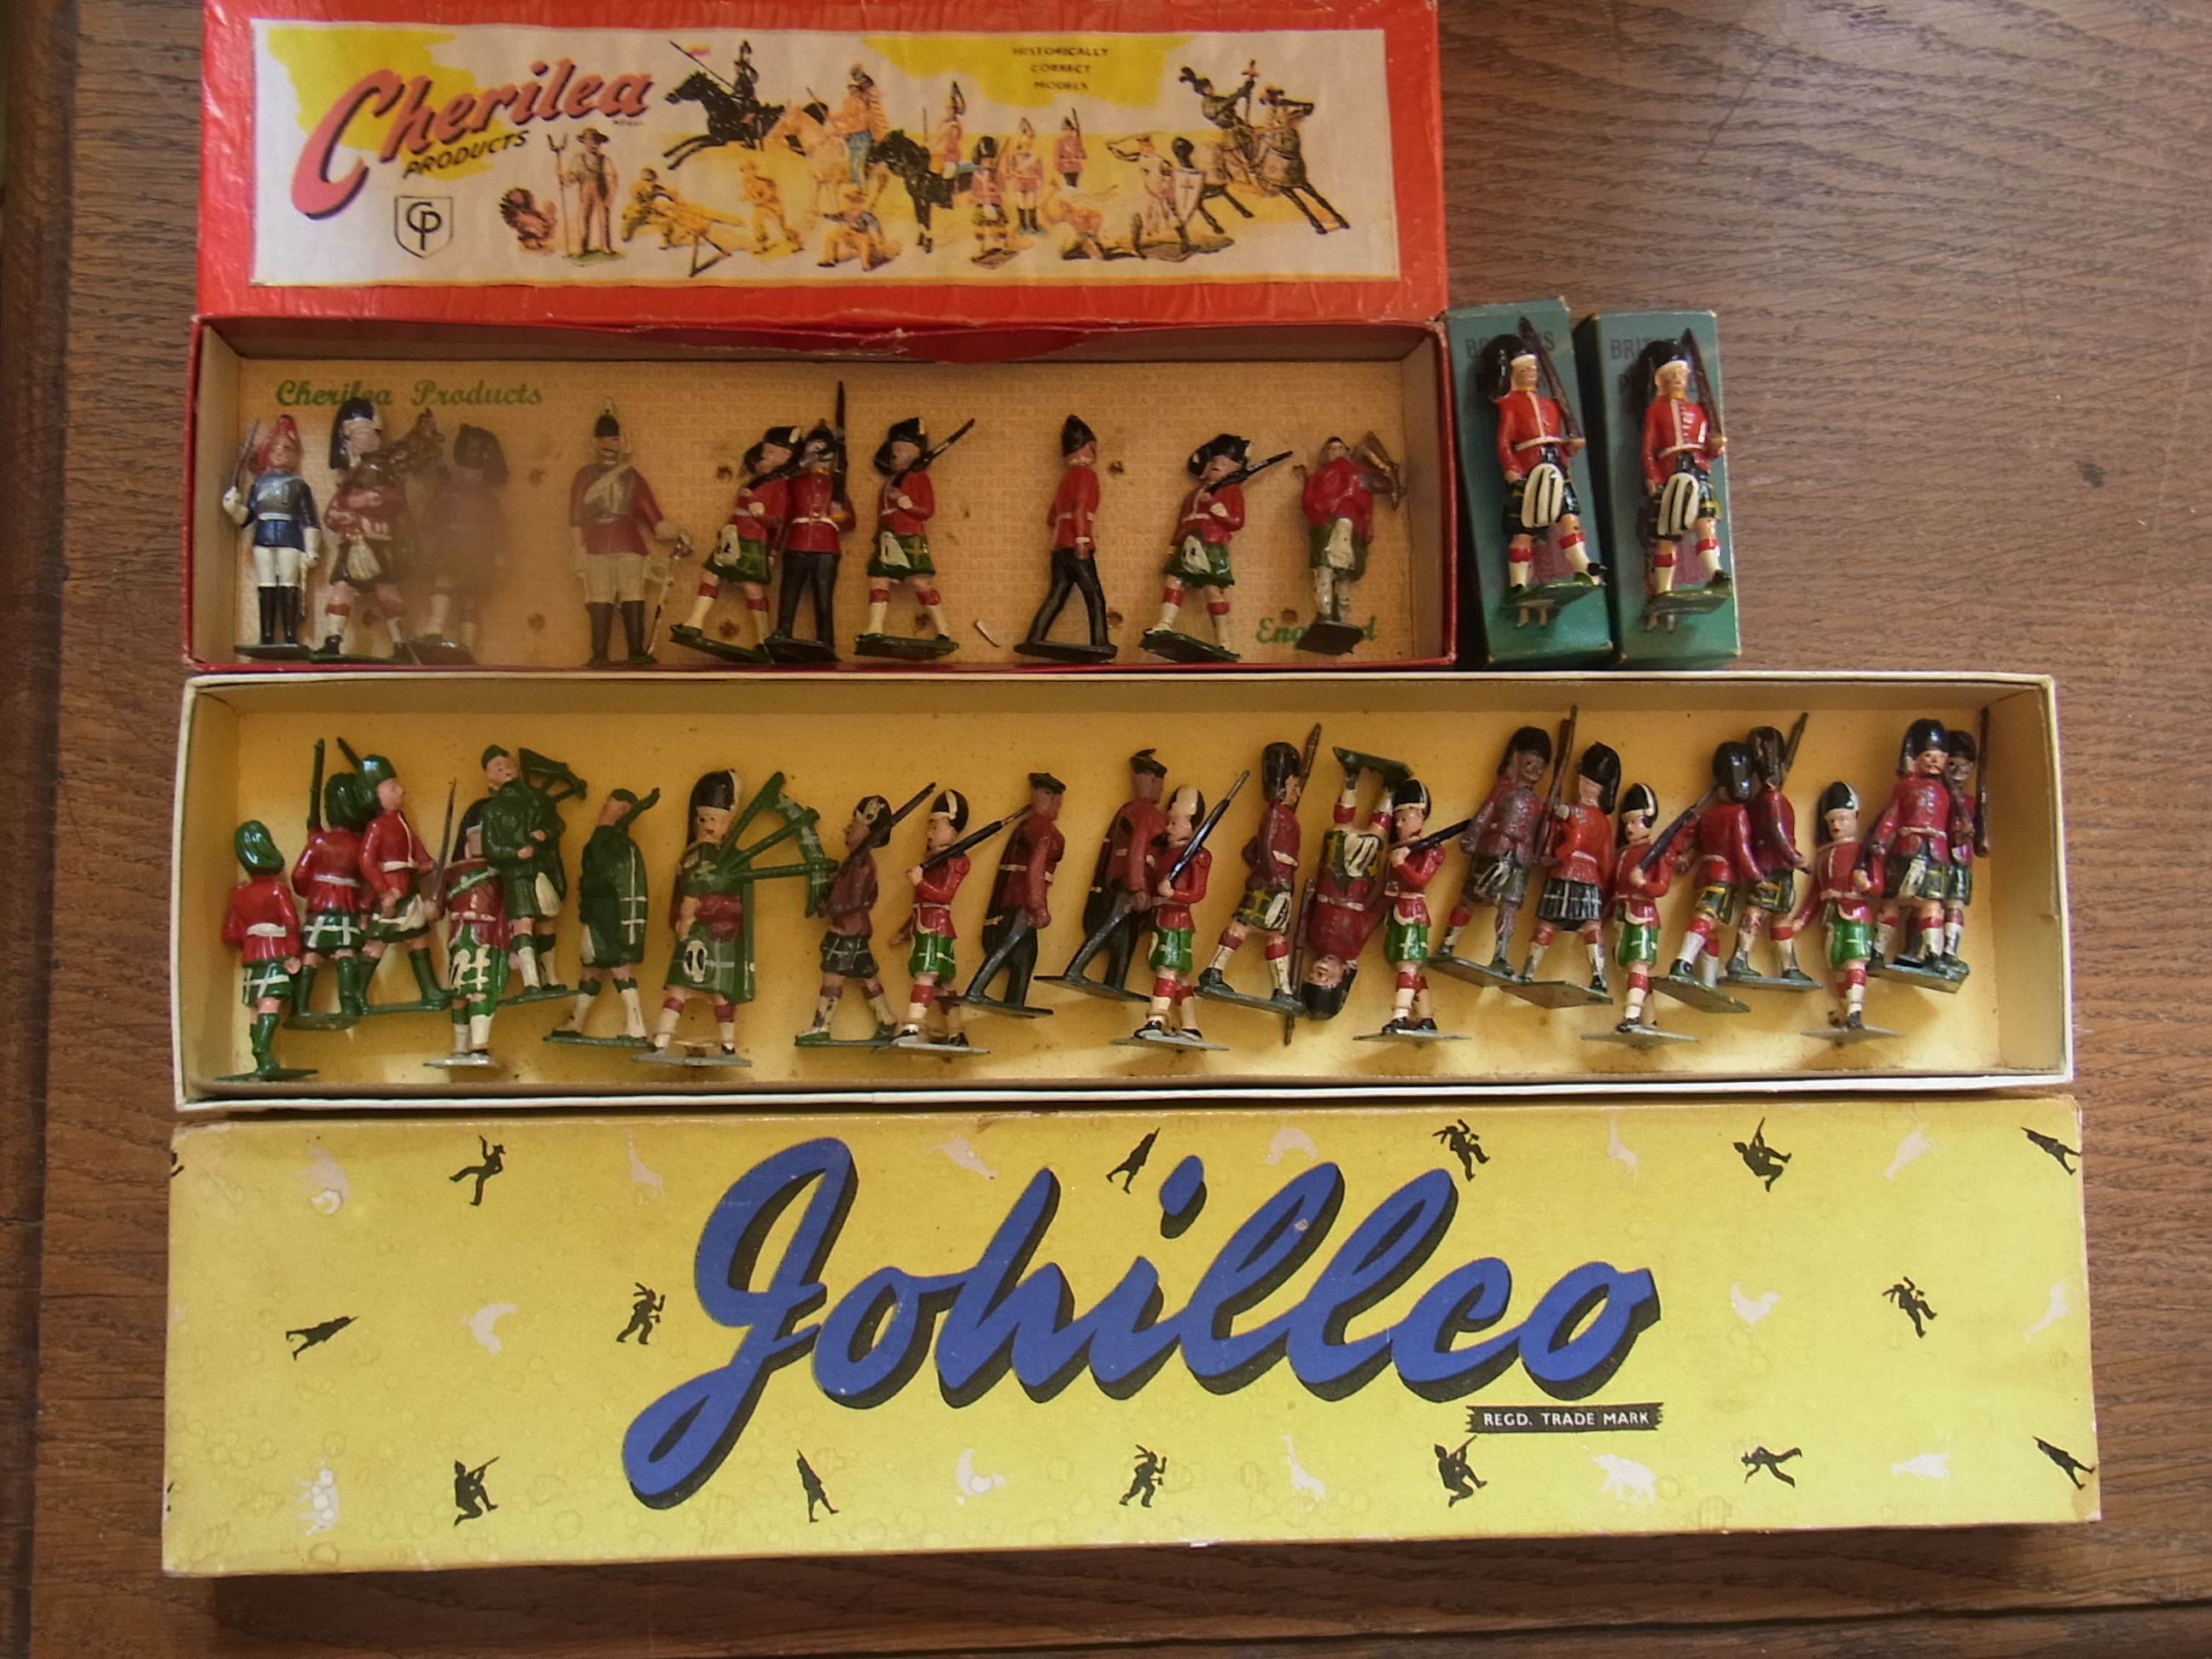 A box of Johillco Lead Soldiers twenty three Scots Soldiers, - Image 2 of 2